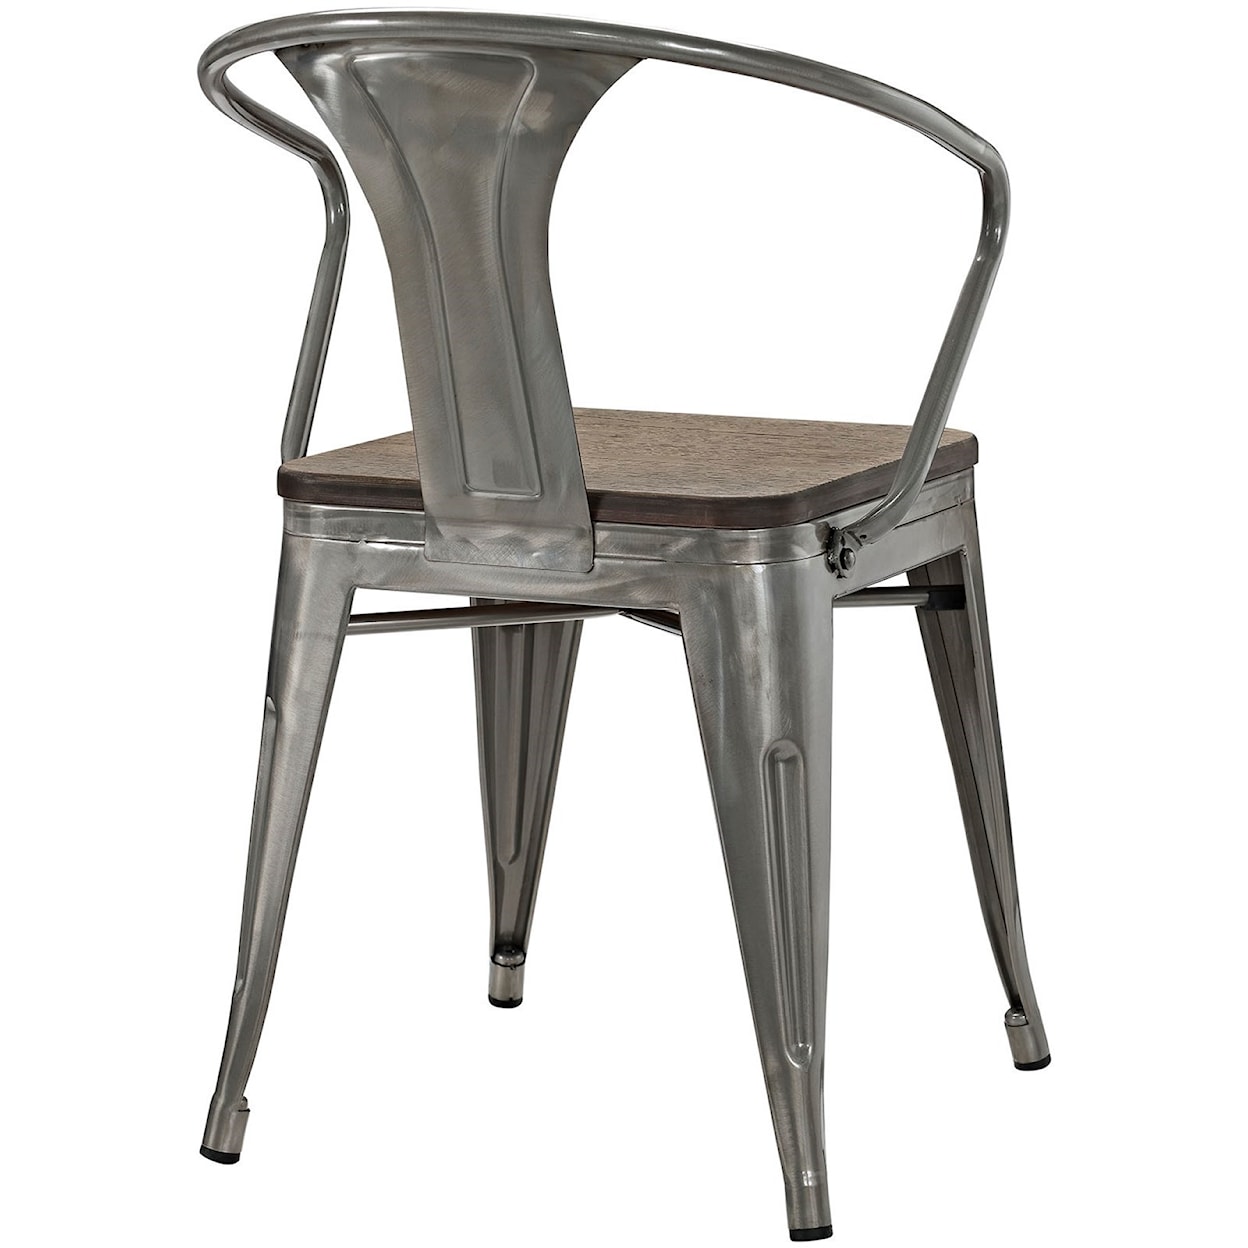 Modway Promenade Bamboo Dining Chair